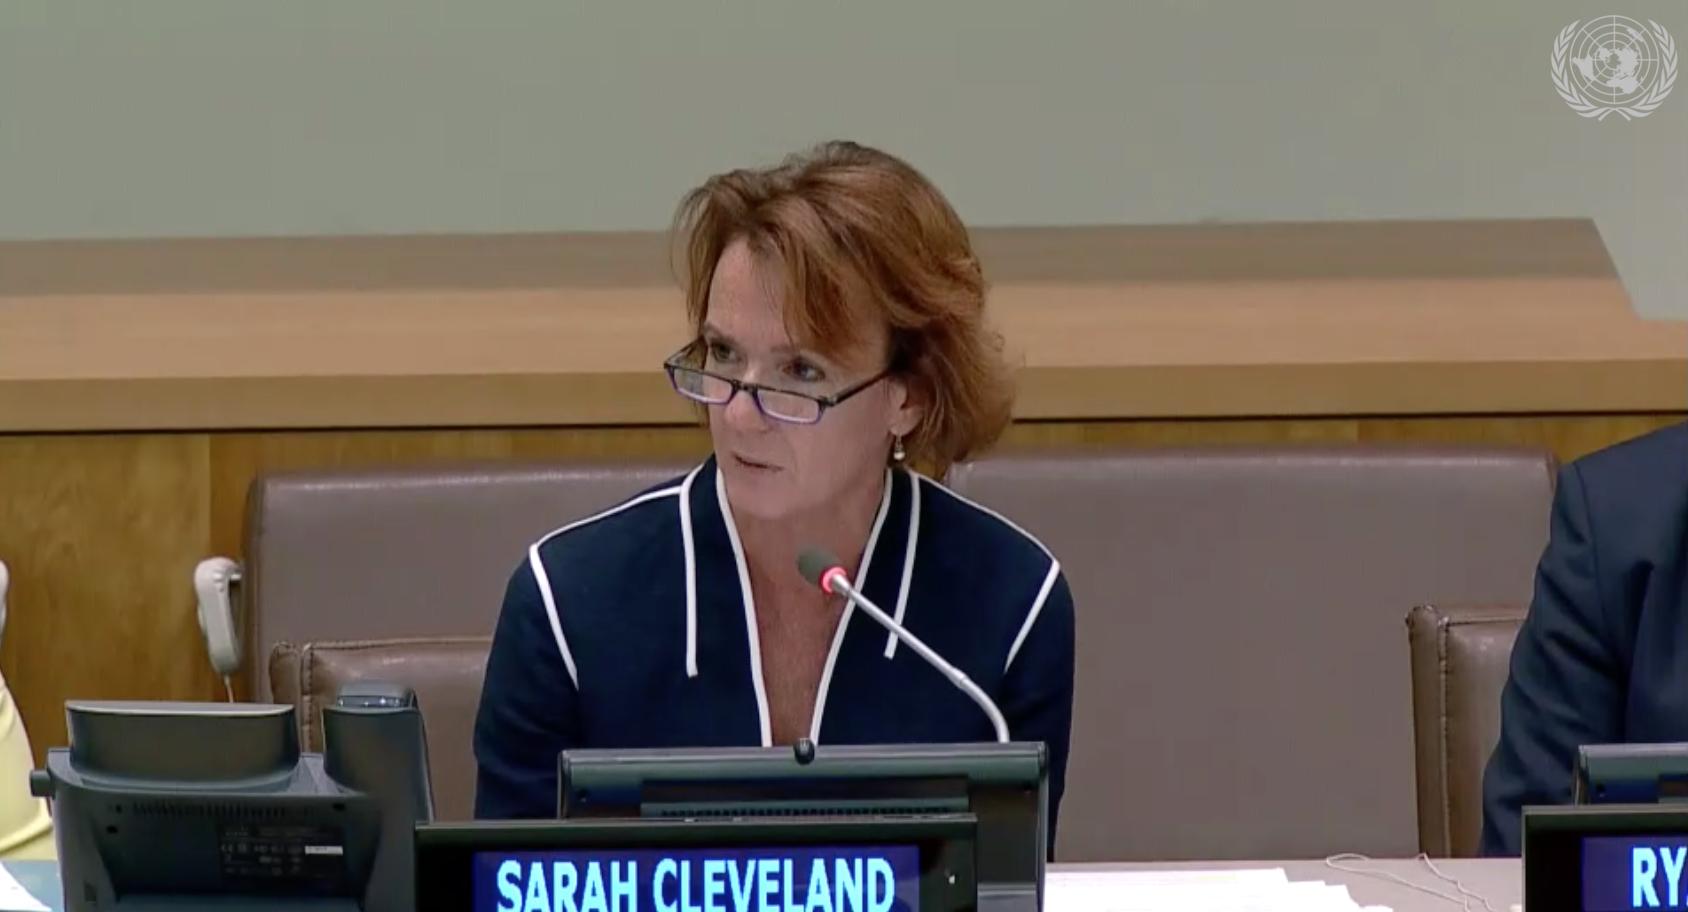 Prof. Sarah Cleveland, human rights lawyer & member of the UN Human Rights Committee, who partly dissented in the case of Nasir v Australia (image: @UKUN_NewYork)